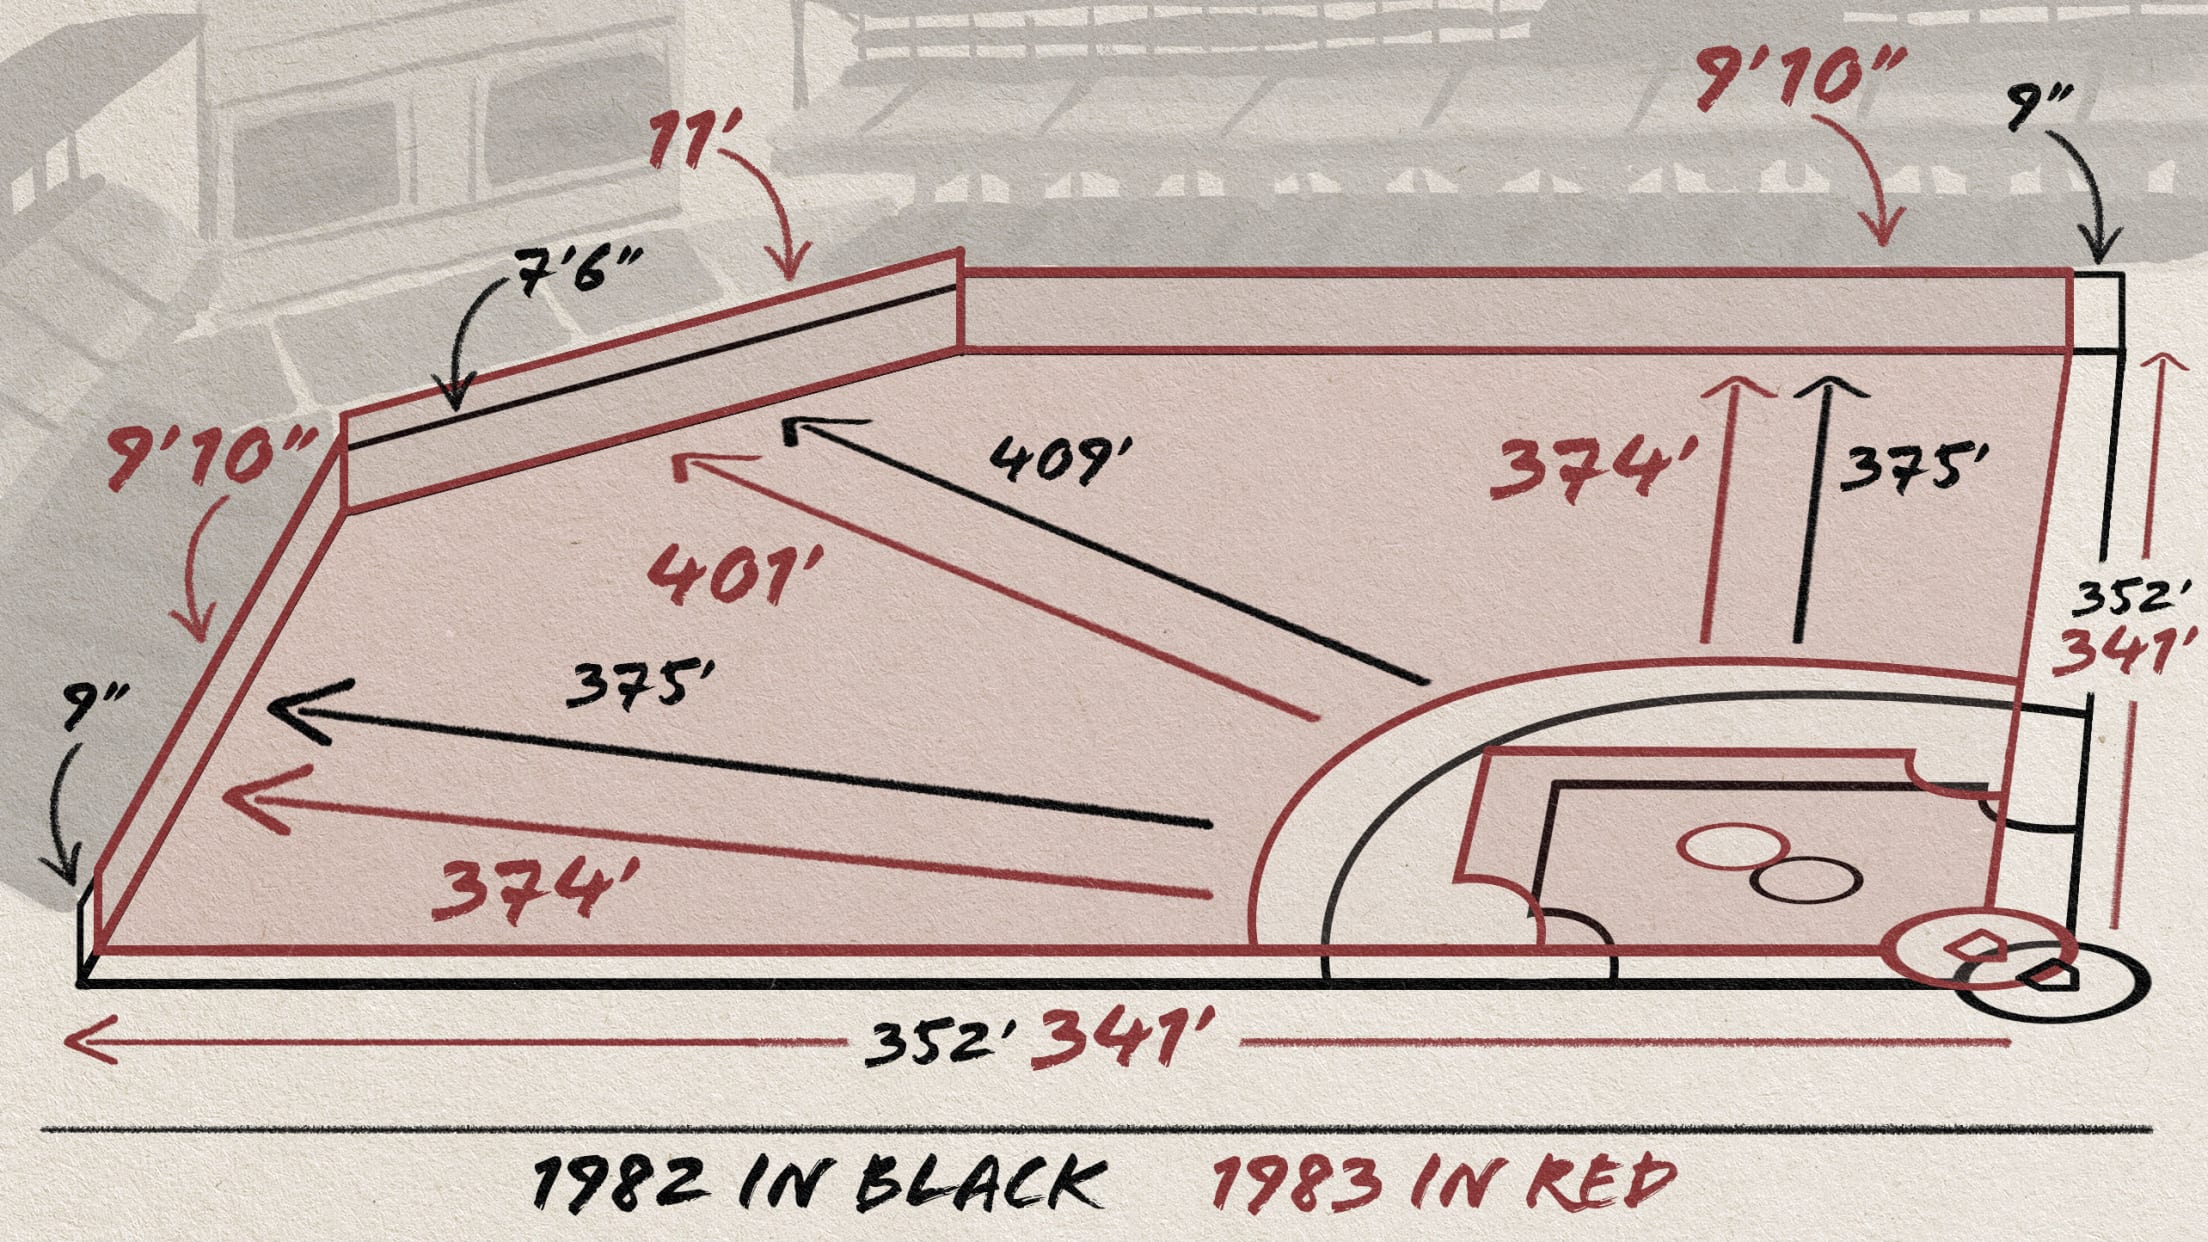 White Sox changed Comiskey Park dimensions for more home runs